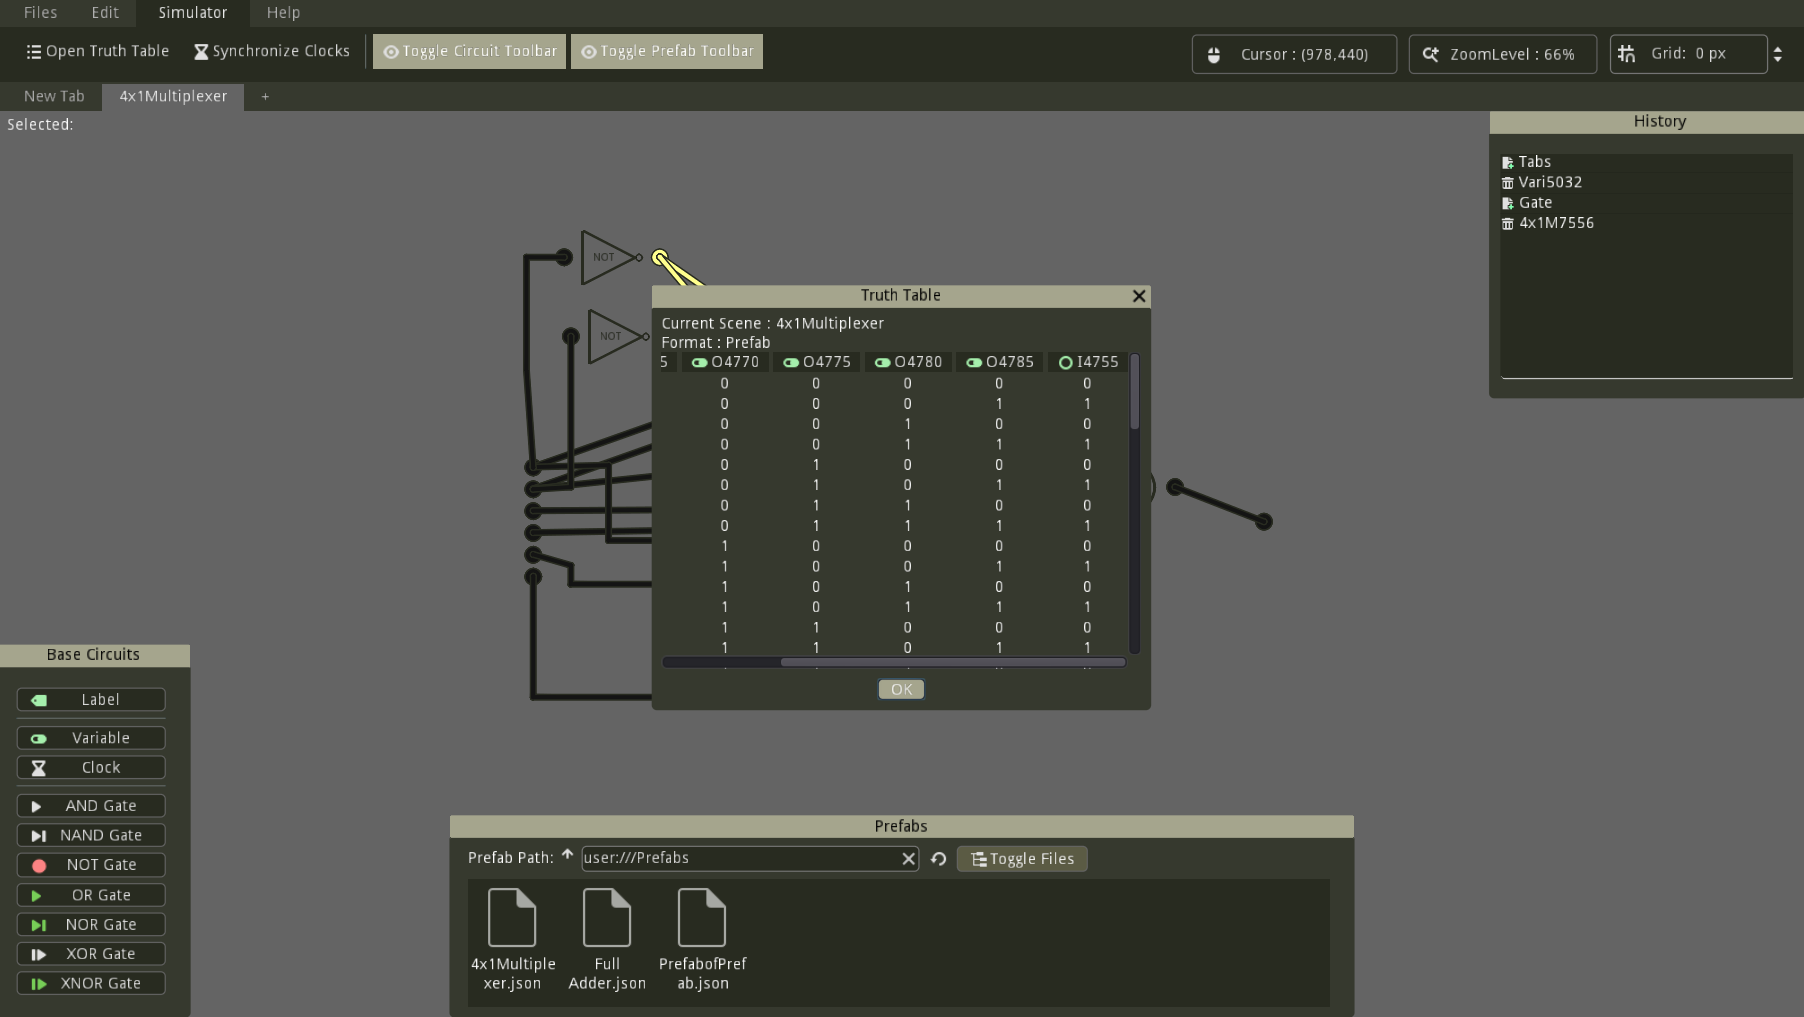 Logic Circuit Simulator A Free And Open source Logic Circuit Simulator Built In Godot Engine 